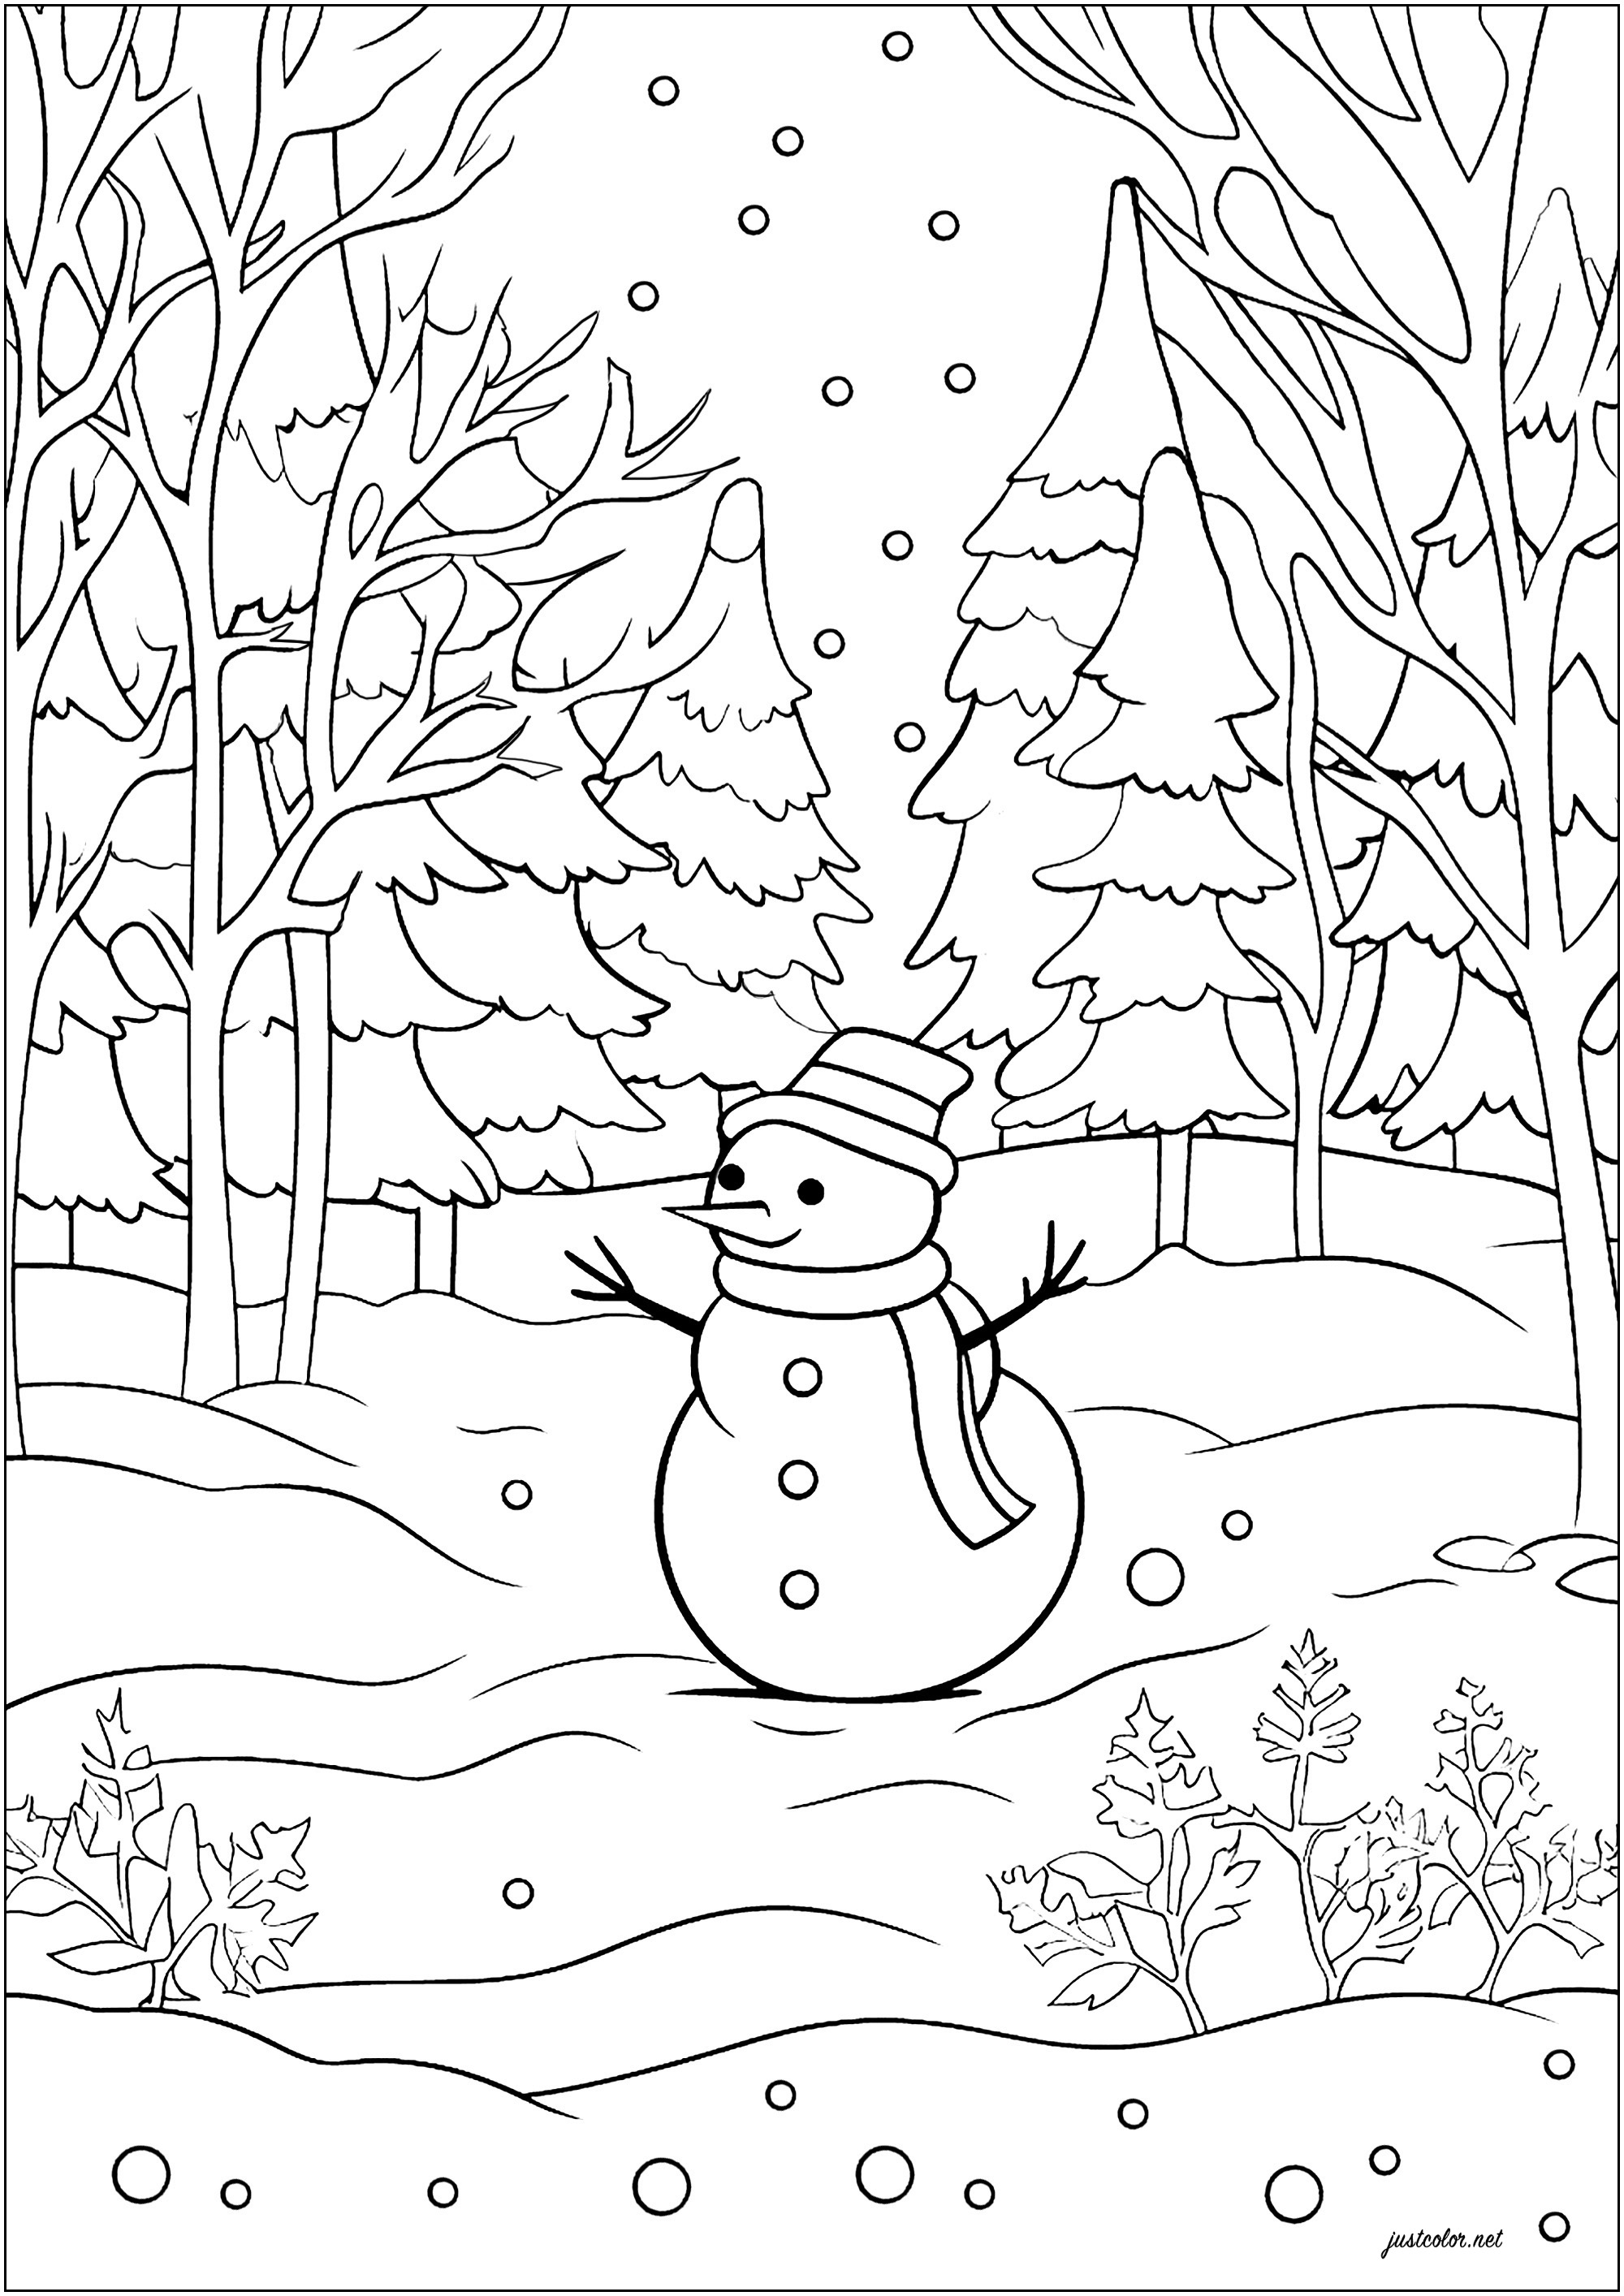 Snowman in the snowy forest